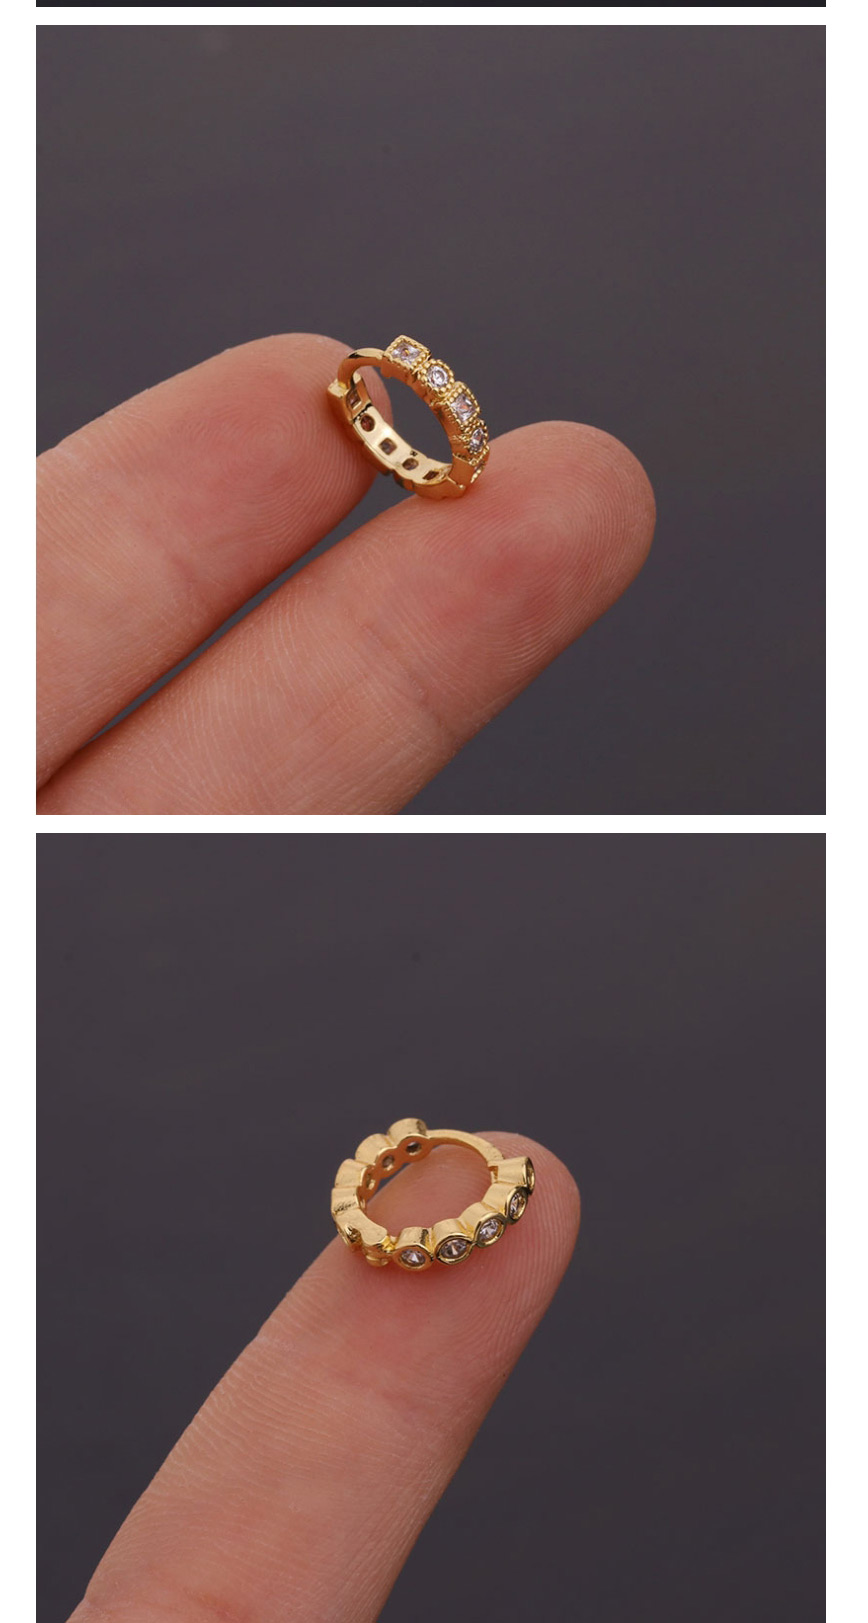 Fashion 10#gold Color Round Geometry Inlaid Zircon Stainless Steel Earrings (1pcs),Earrings